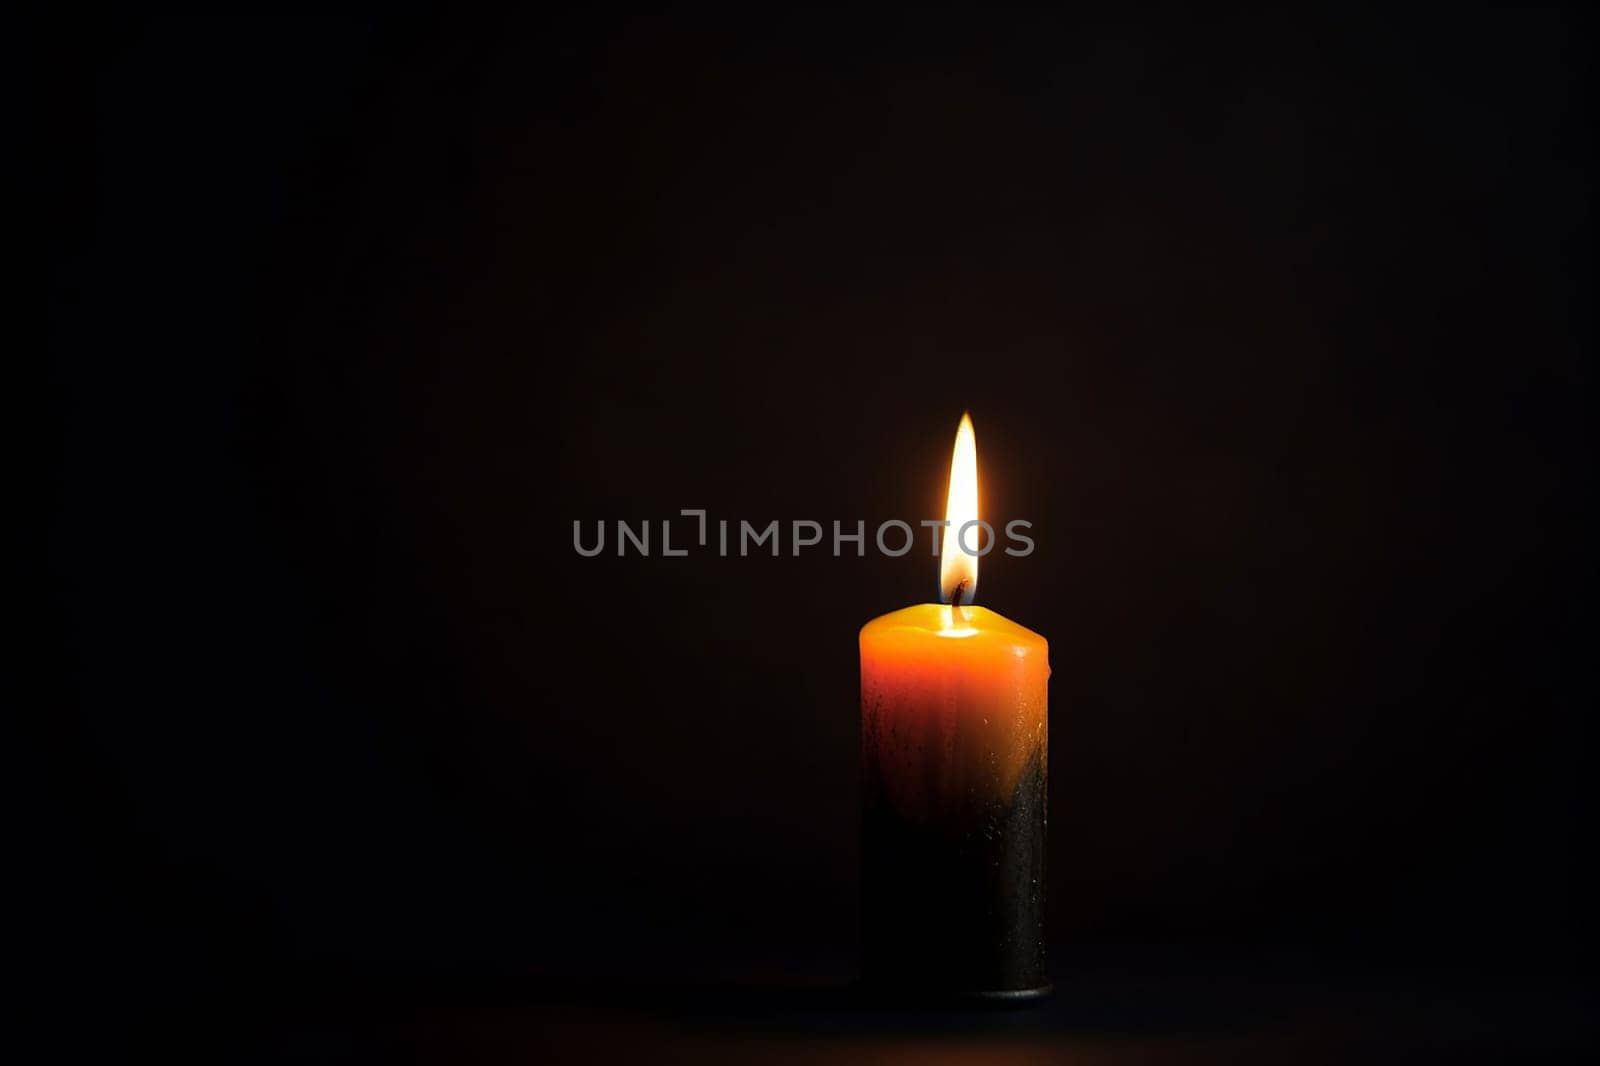 A lone lit candle against a dark background. by Hype2art